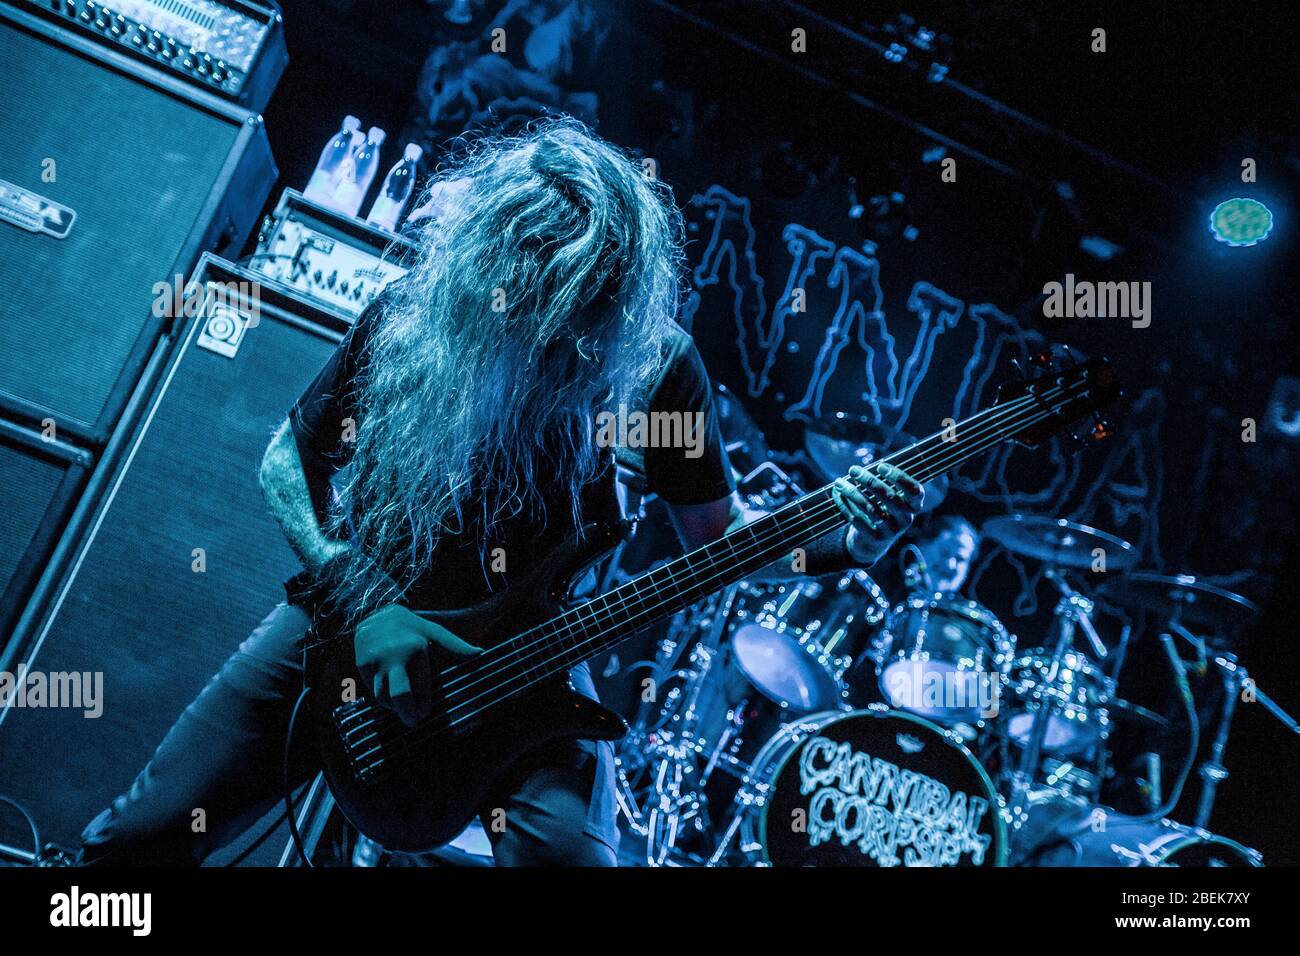 Kolding, Denmark. 15th, February 2018. The American death metal band Cannibal Corpse performs a live concert at Godset in Kolding. Here bass player Alex Webster is seen live on stage. (Photo credit: Gonzales Photo - Lasse Lagoni). Stock Photo